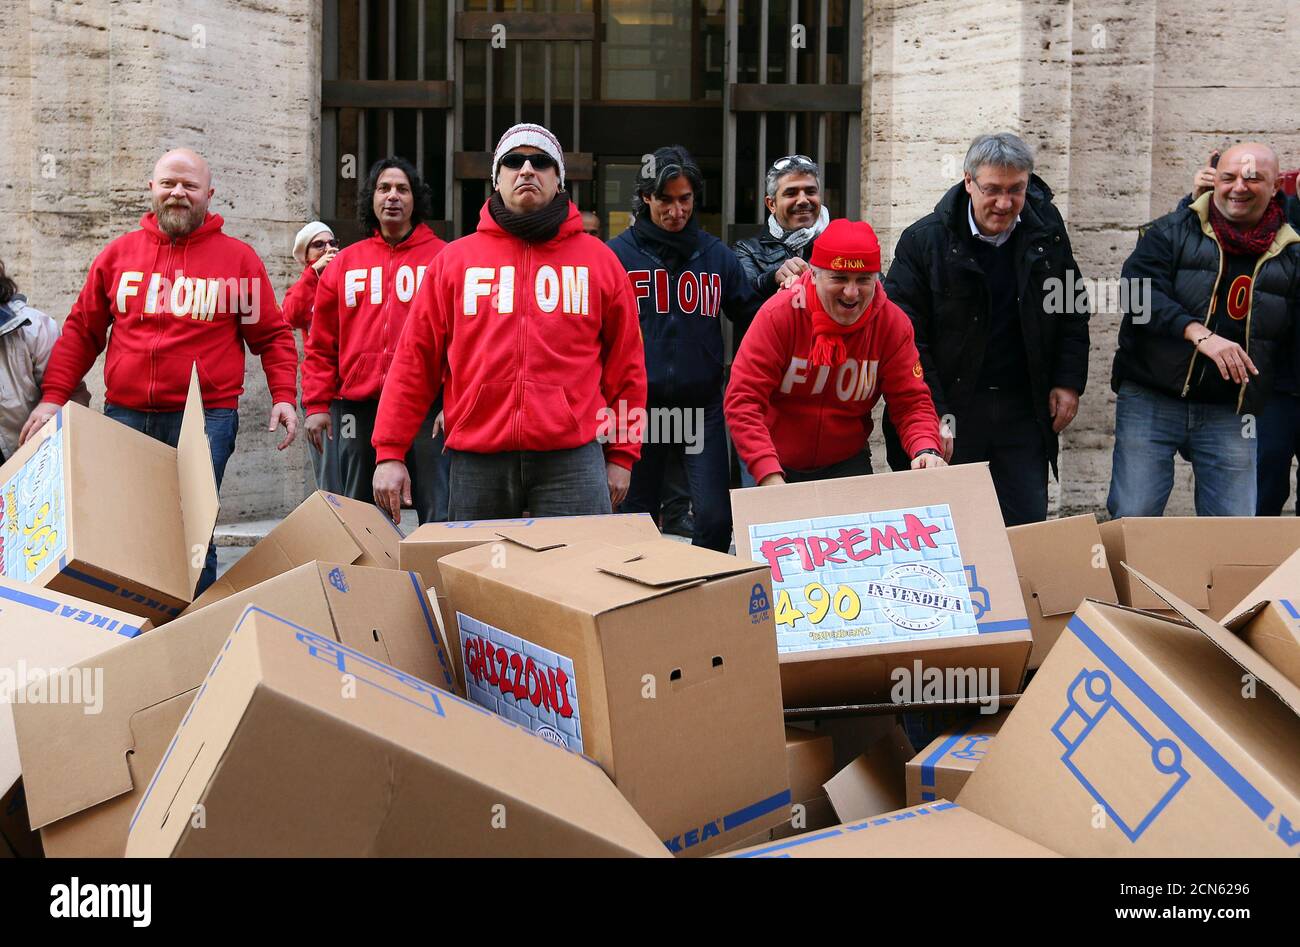 Union workers stand in front of boxes during a protest organised by FIOM union in front of the Ministry of Labour in Rome December 11 ,2013. Prime Minister Enrico Letta called on parliament on Wednesday to back his government or risk chaos as he sought to push through long-avoided reforms intended to revive Italy's economy after two years of recession. REUTERS/Remo Casilli (ITALY - Tags: BUSINESS CIVIL UNREST POLITICS EMPLOYMENT) Stock Photo